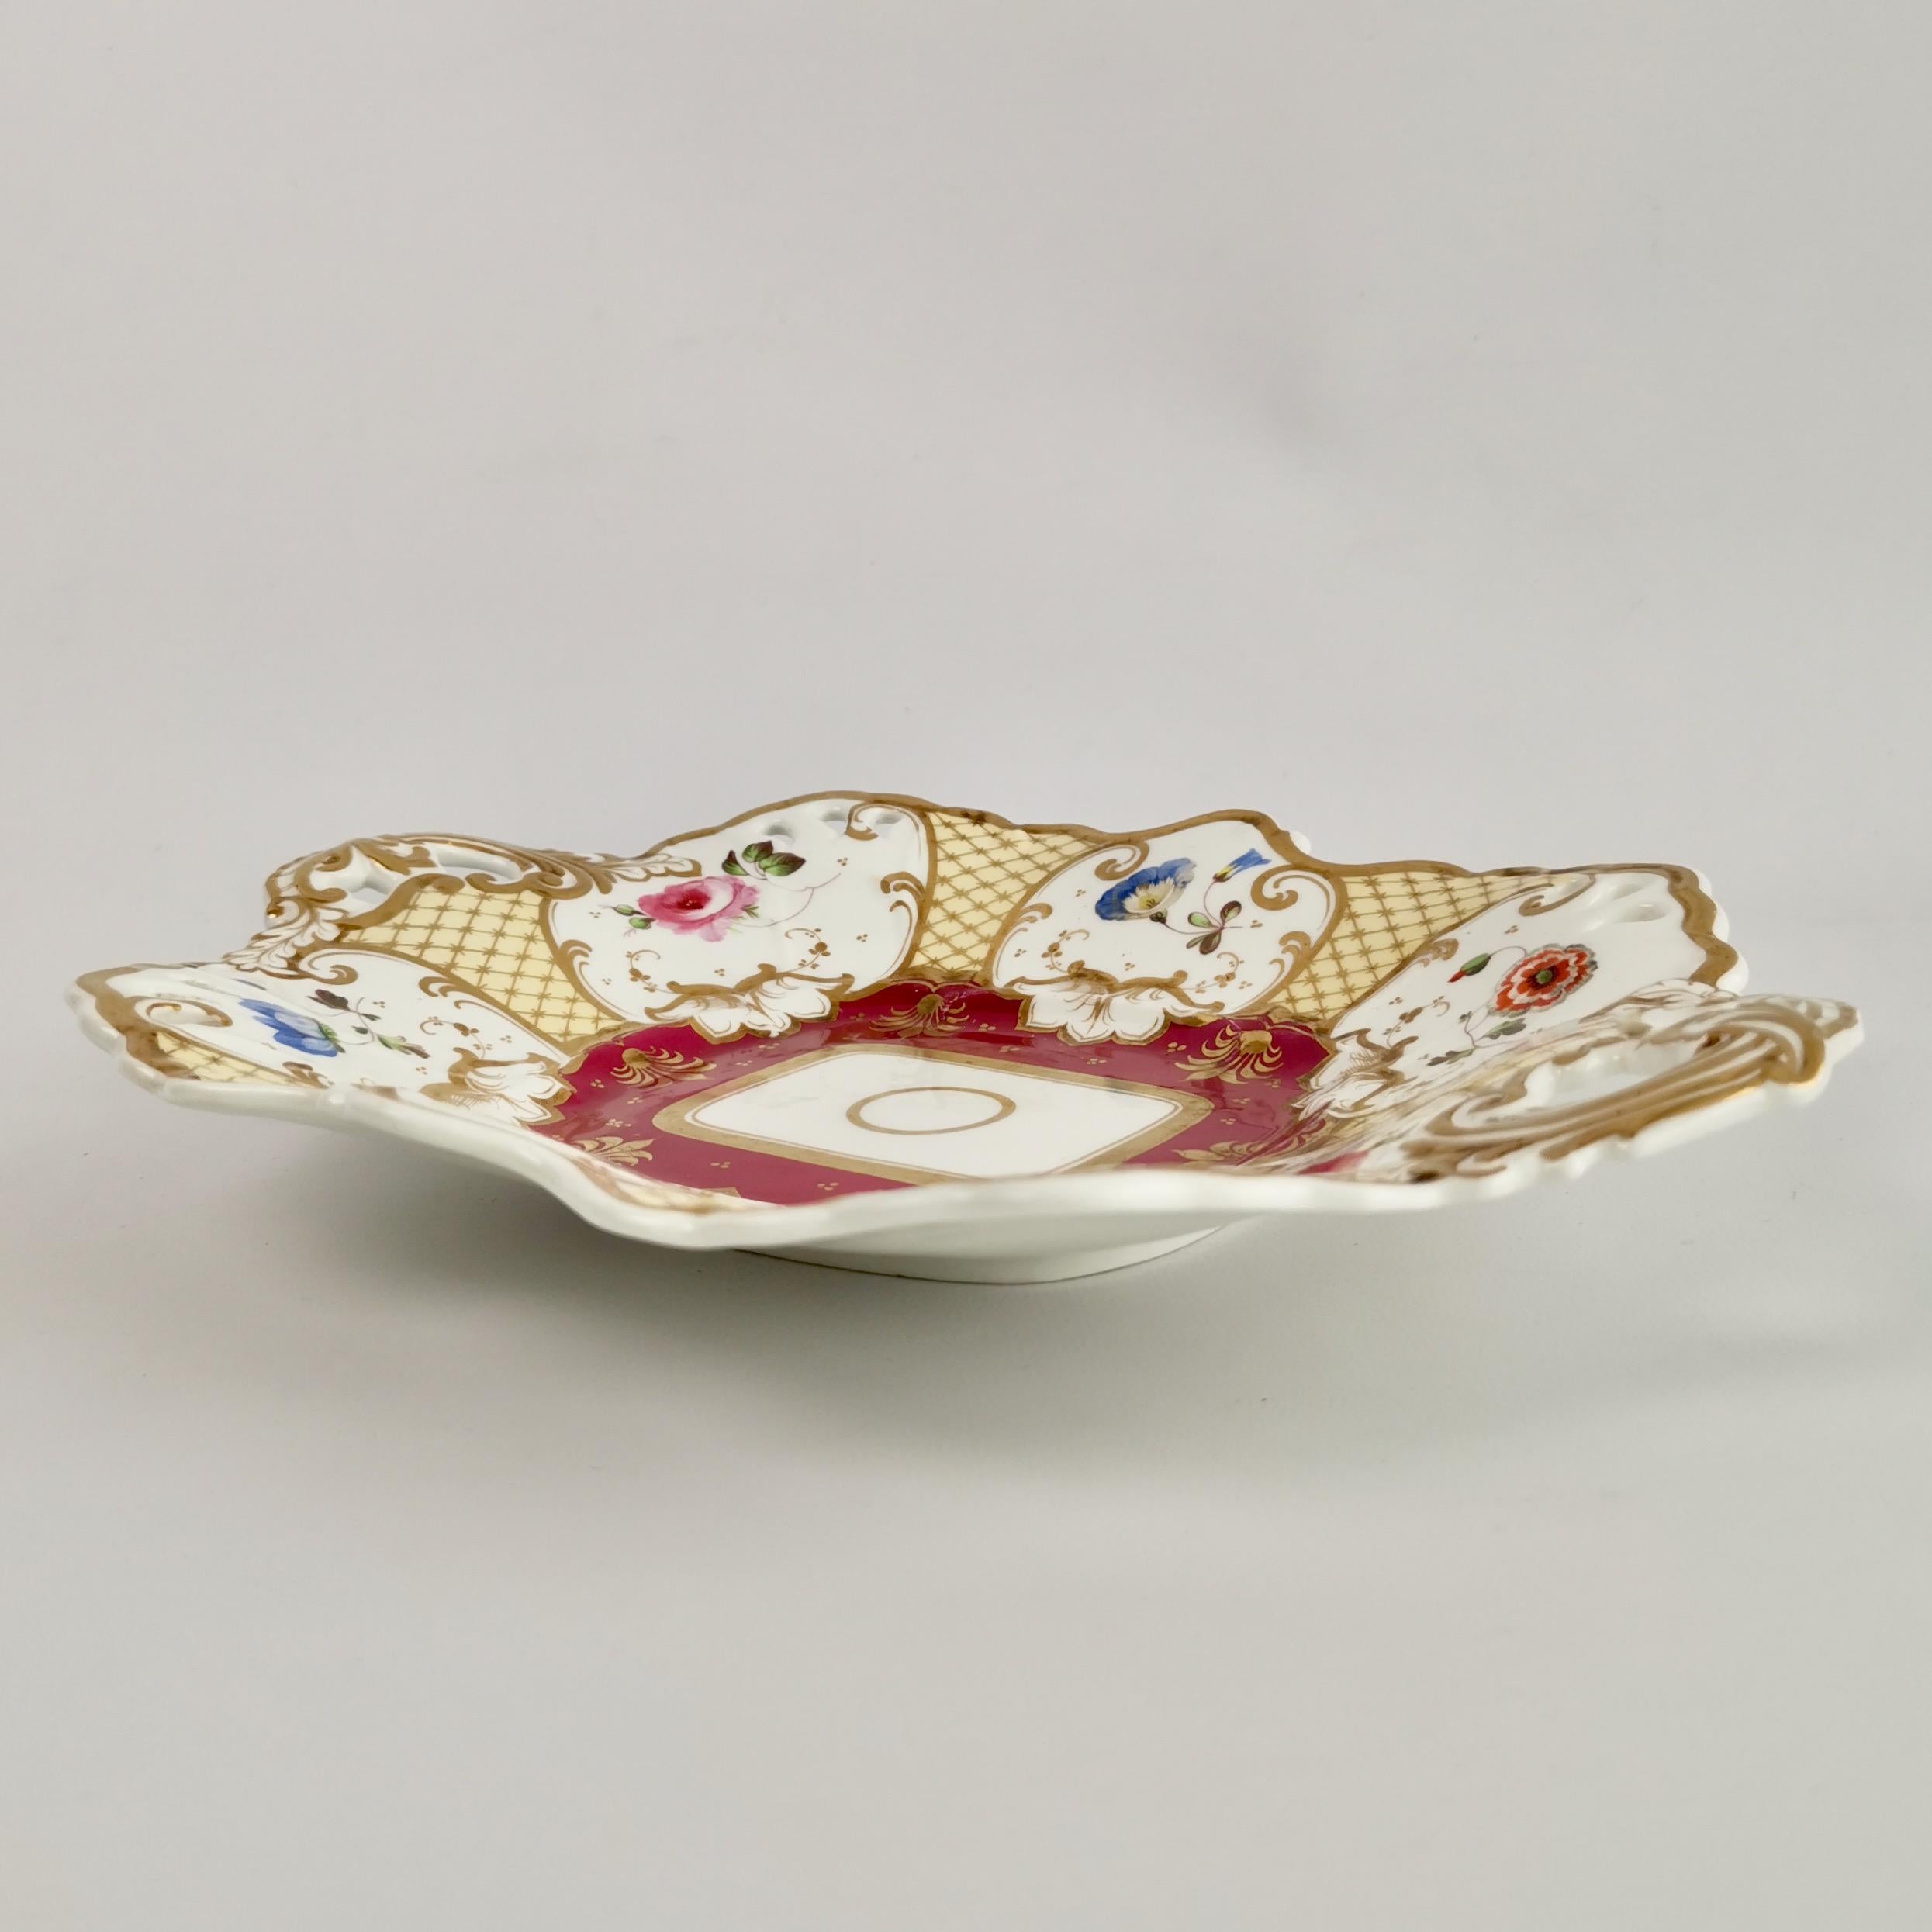 Samuel Alcock Porcelain Dish, Maroon, Gilt and Flowers, Rococo Revival, ca 1835 8